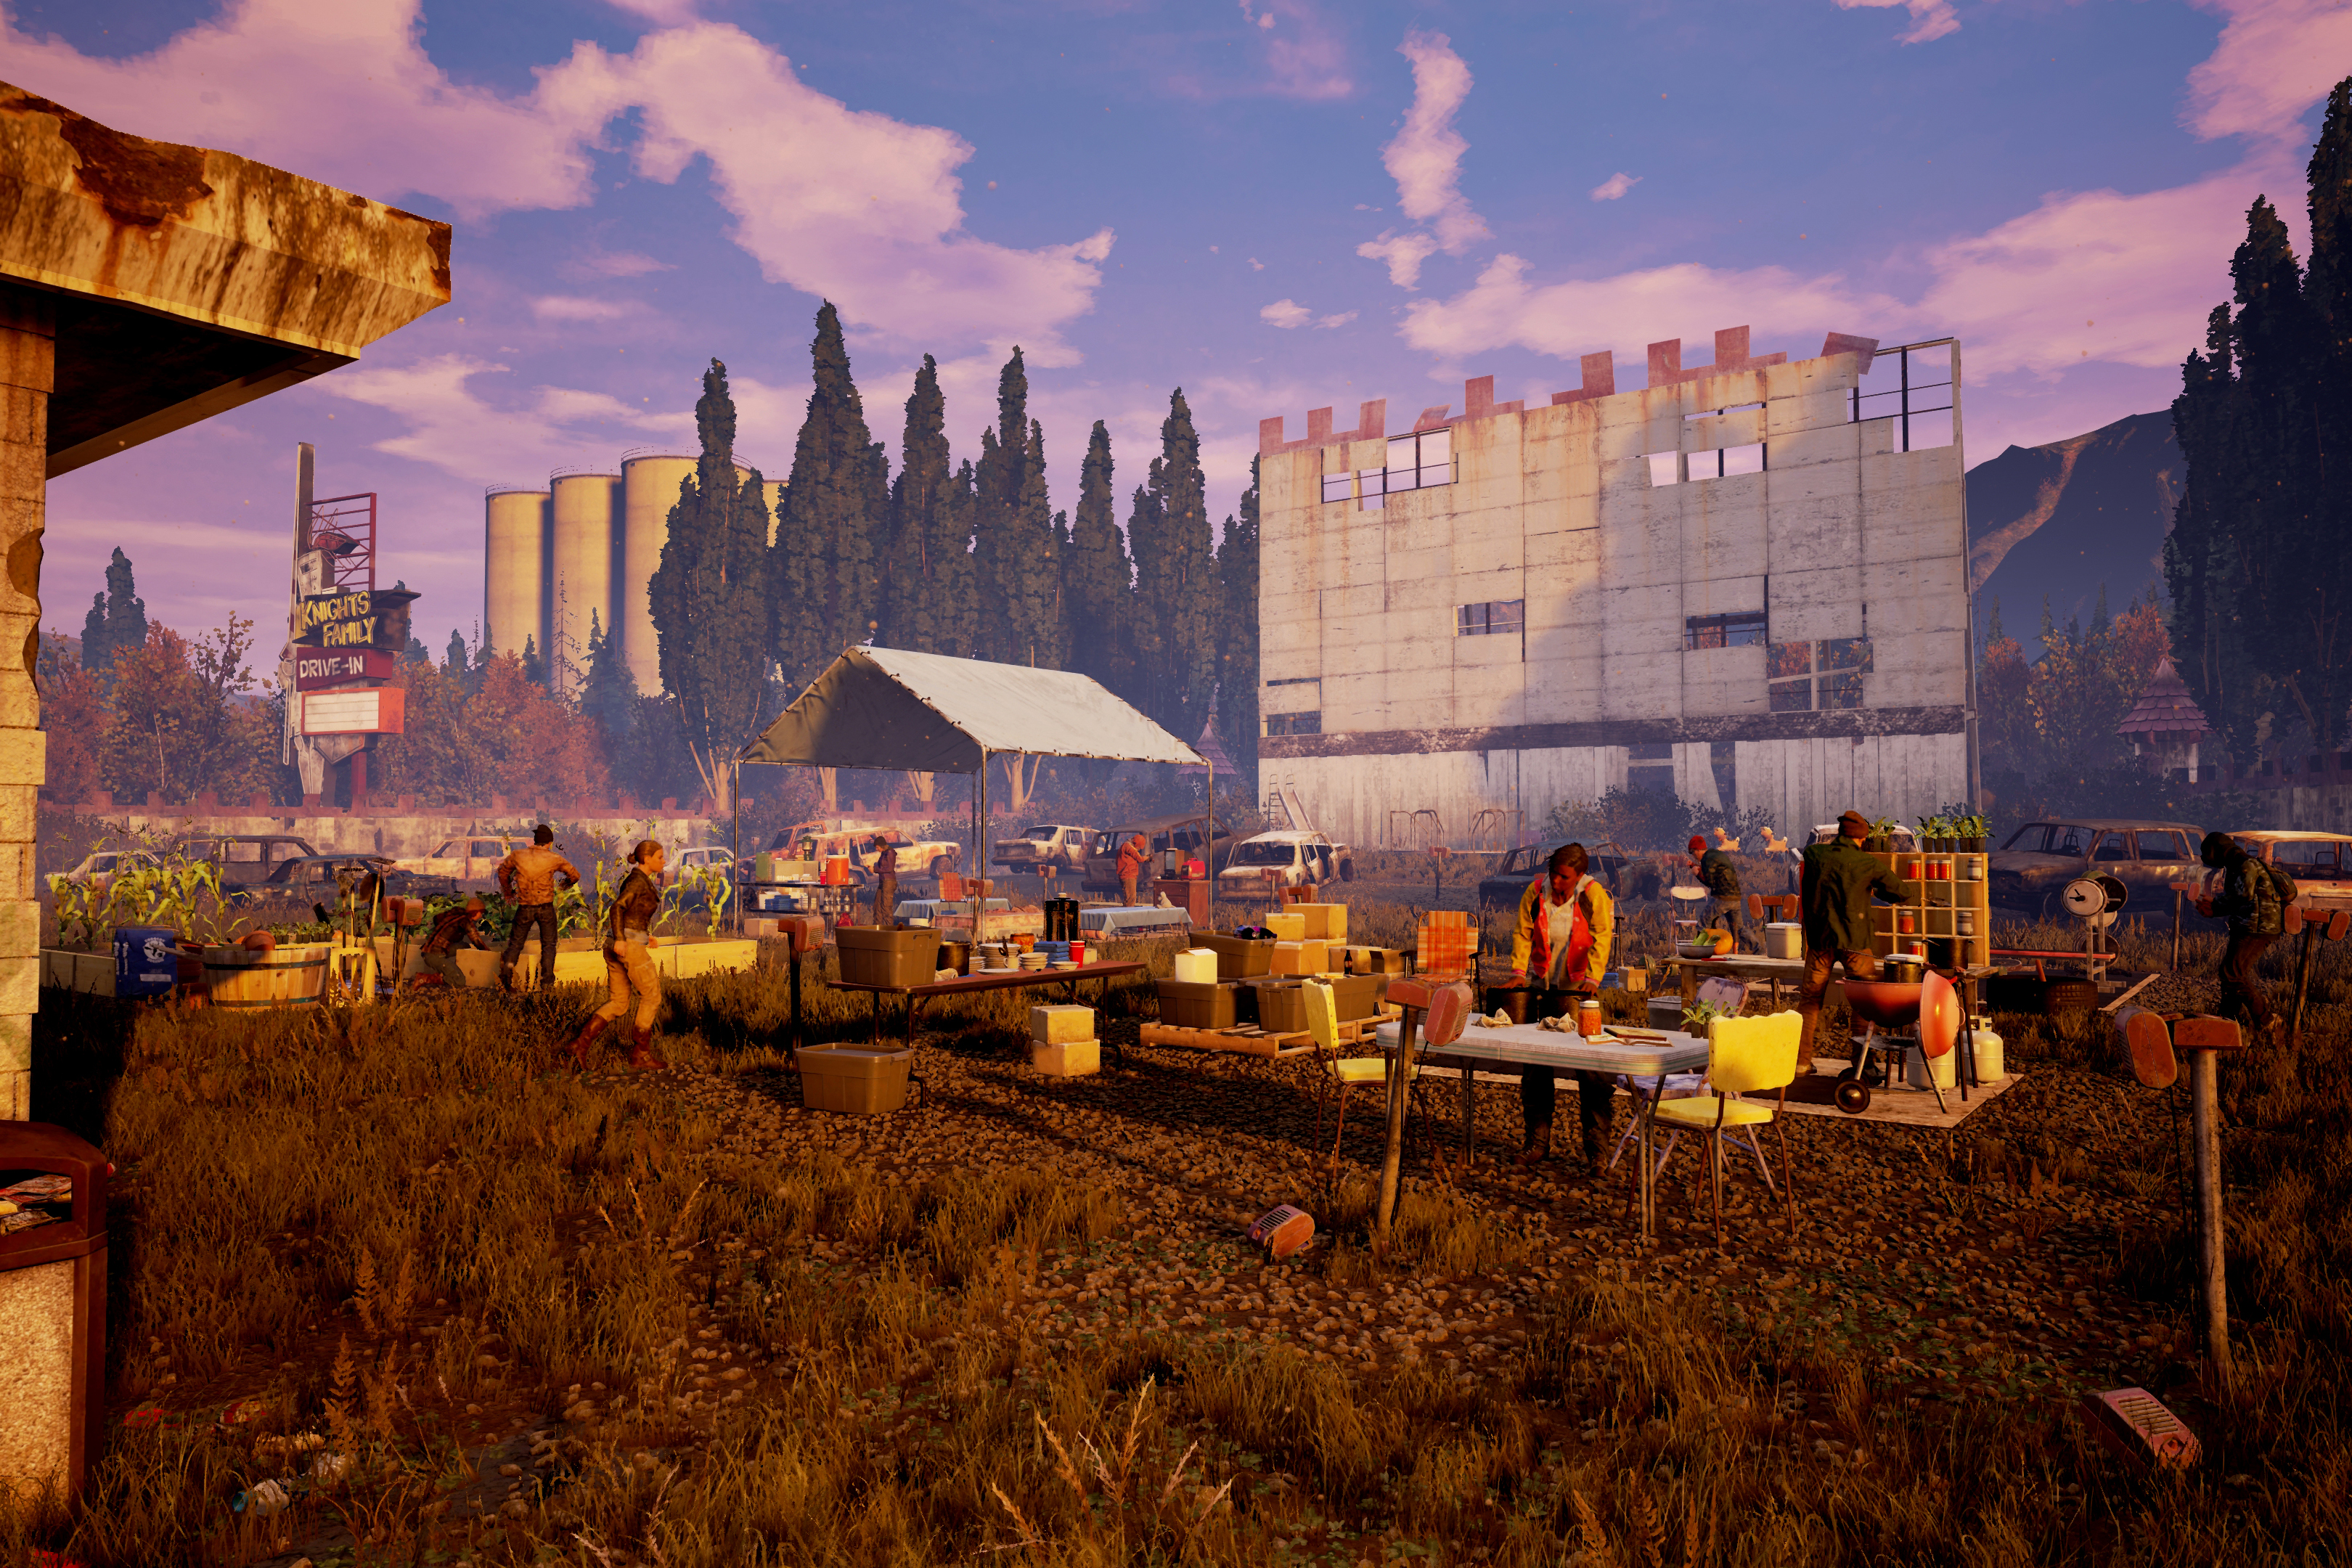 State of Decay 2 Tips - Controls Guide, How to Save, How to Promote and  Change Leaders